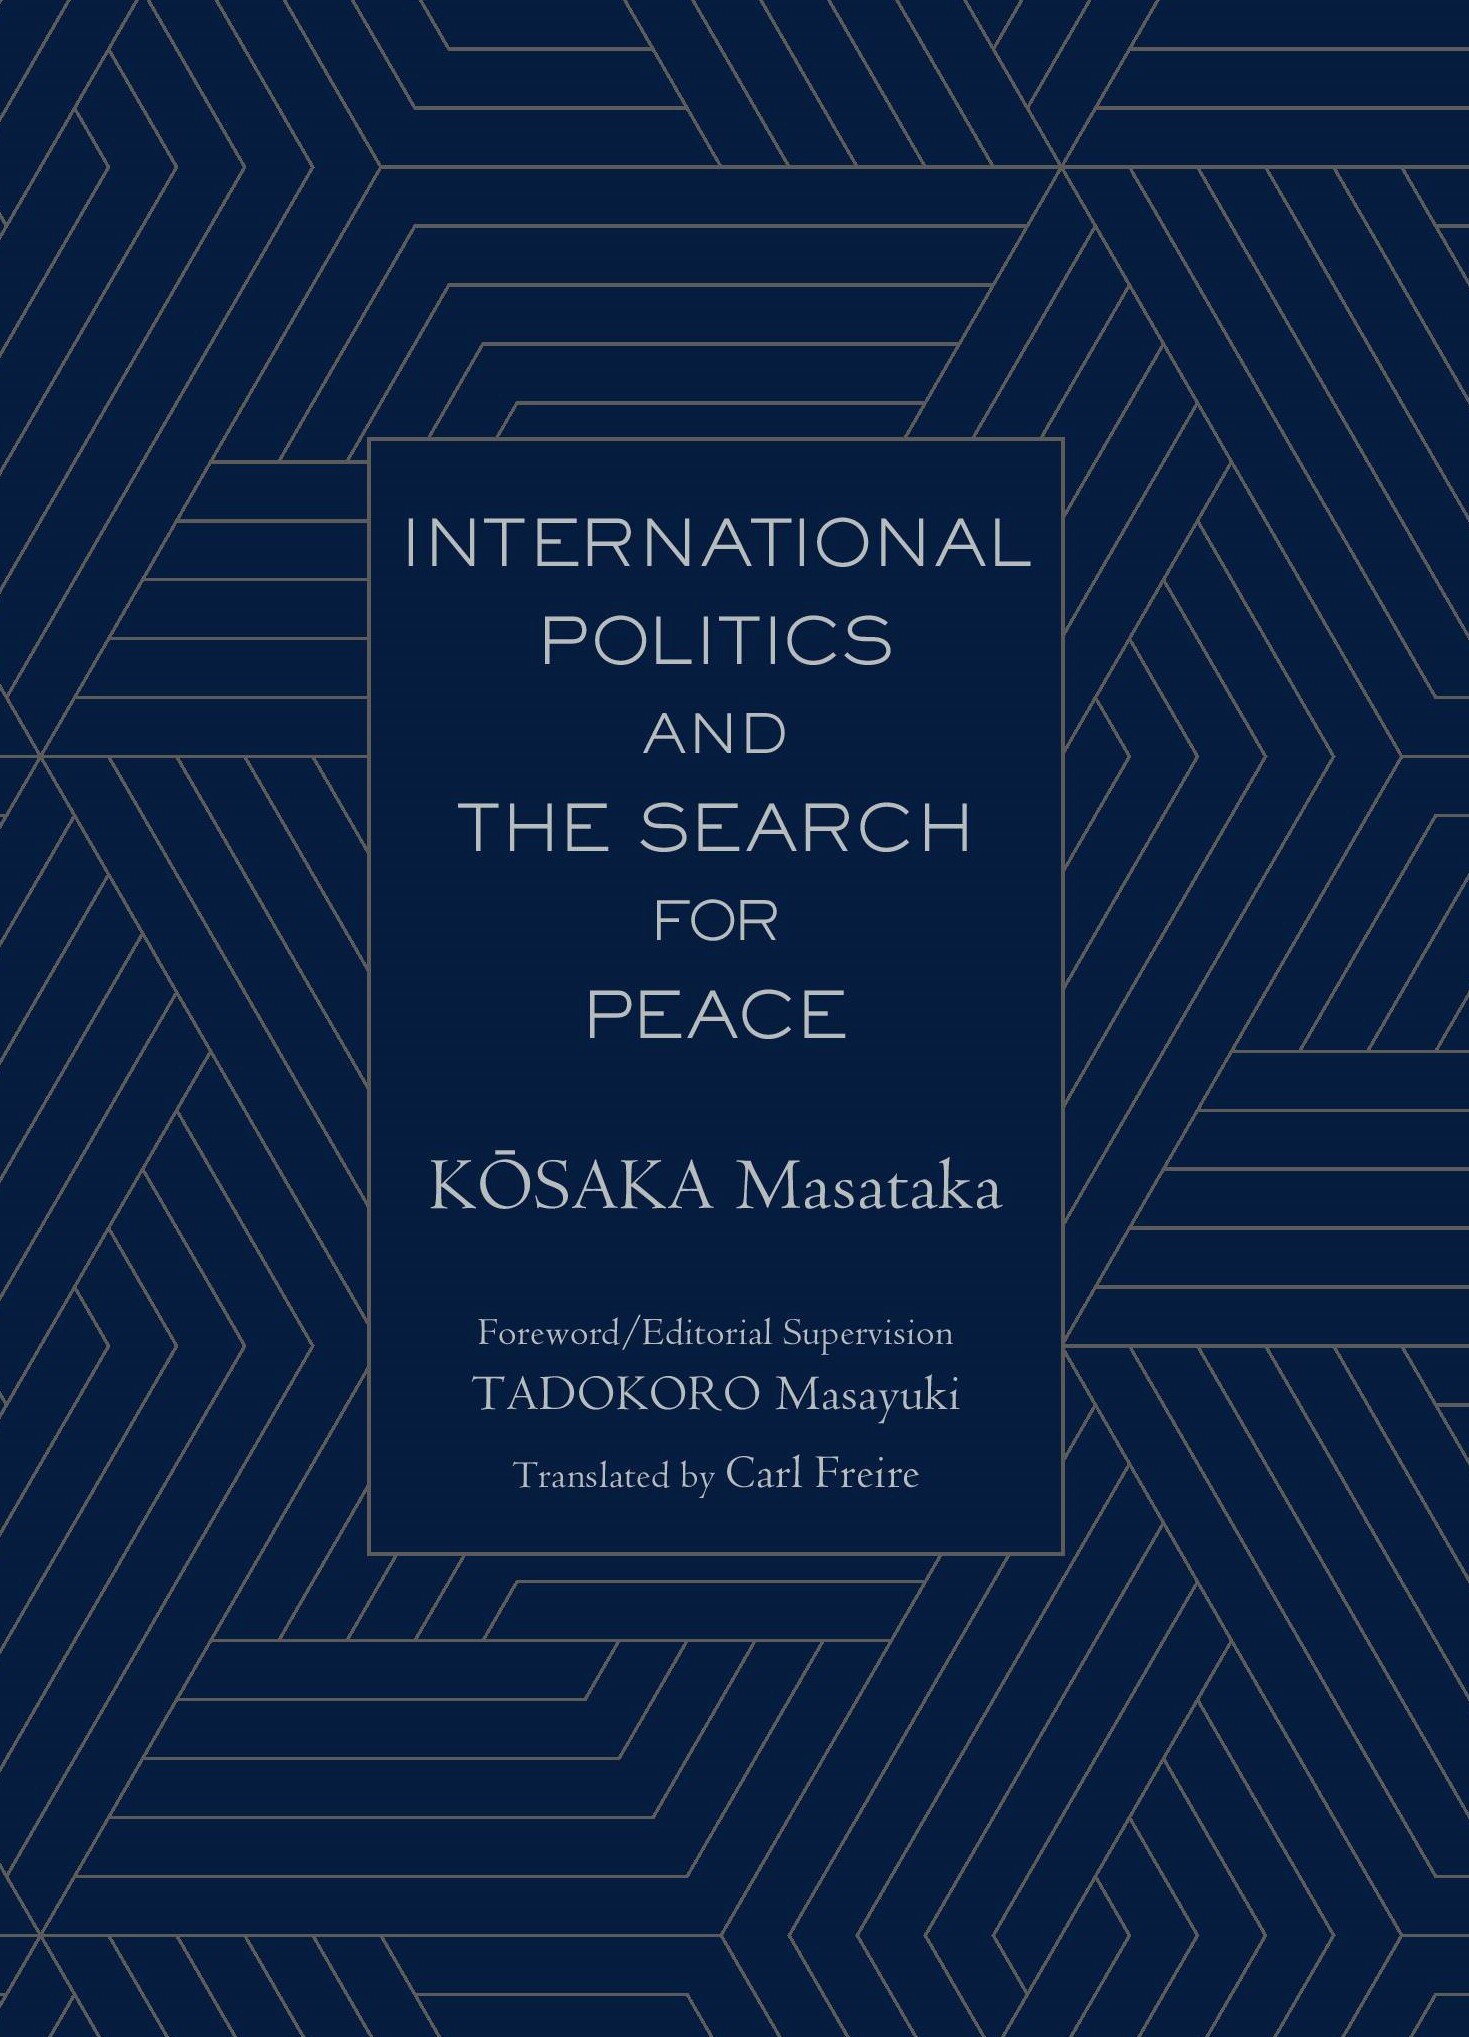 International Politics and the Search for Peace | JPIC INTERNATIONAL